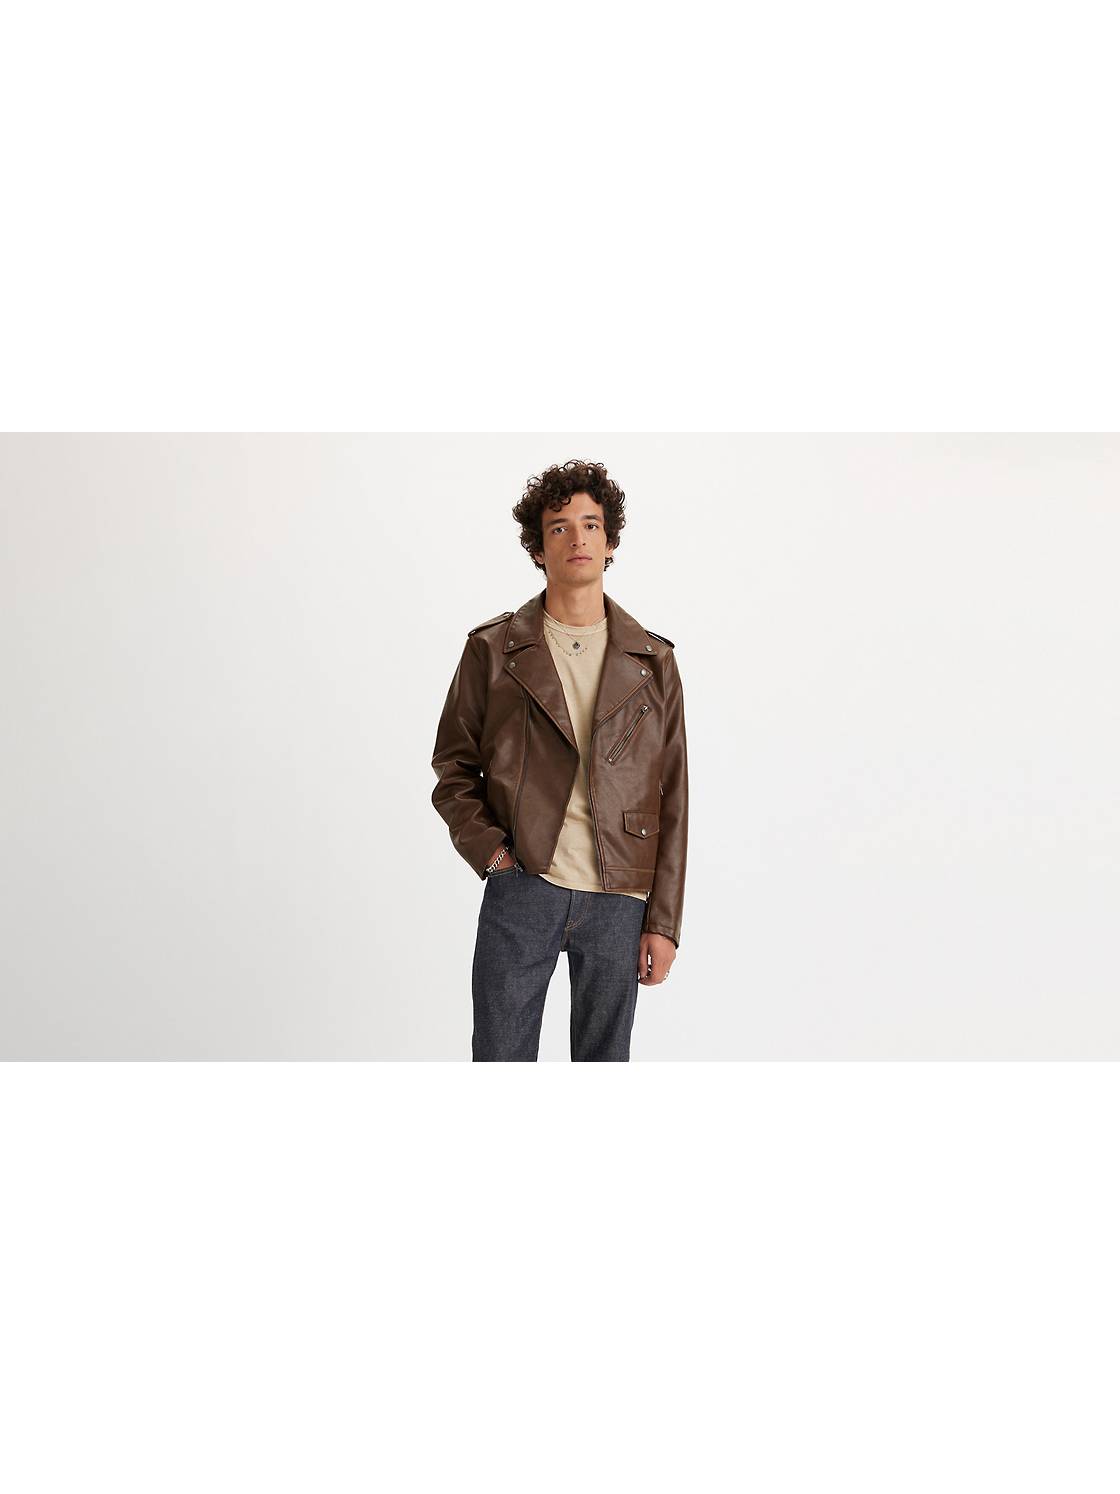 Levi's The Fishing Jacket Sepia Brown Men's Size Large MSRP $128